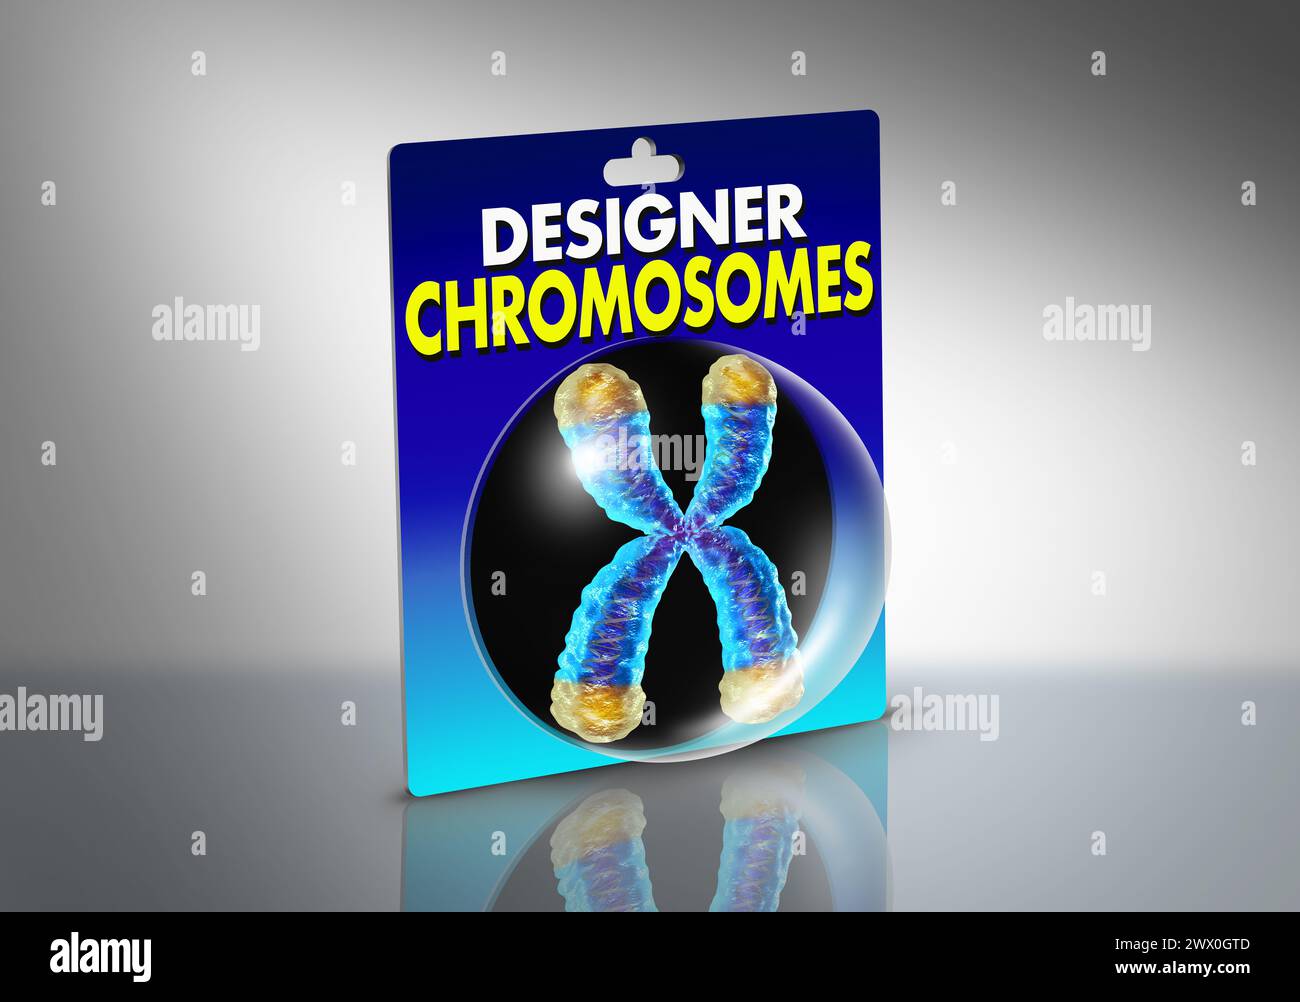 Designer Chromosomes and artificially engineered and synthetically created chromosome as synthetic biology with edited man made genetic material. Stock Photo